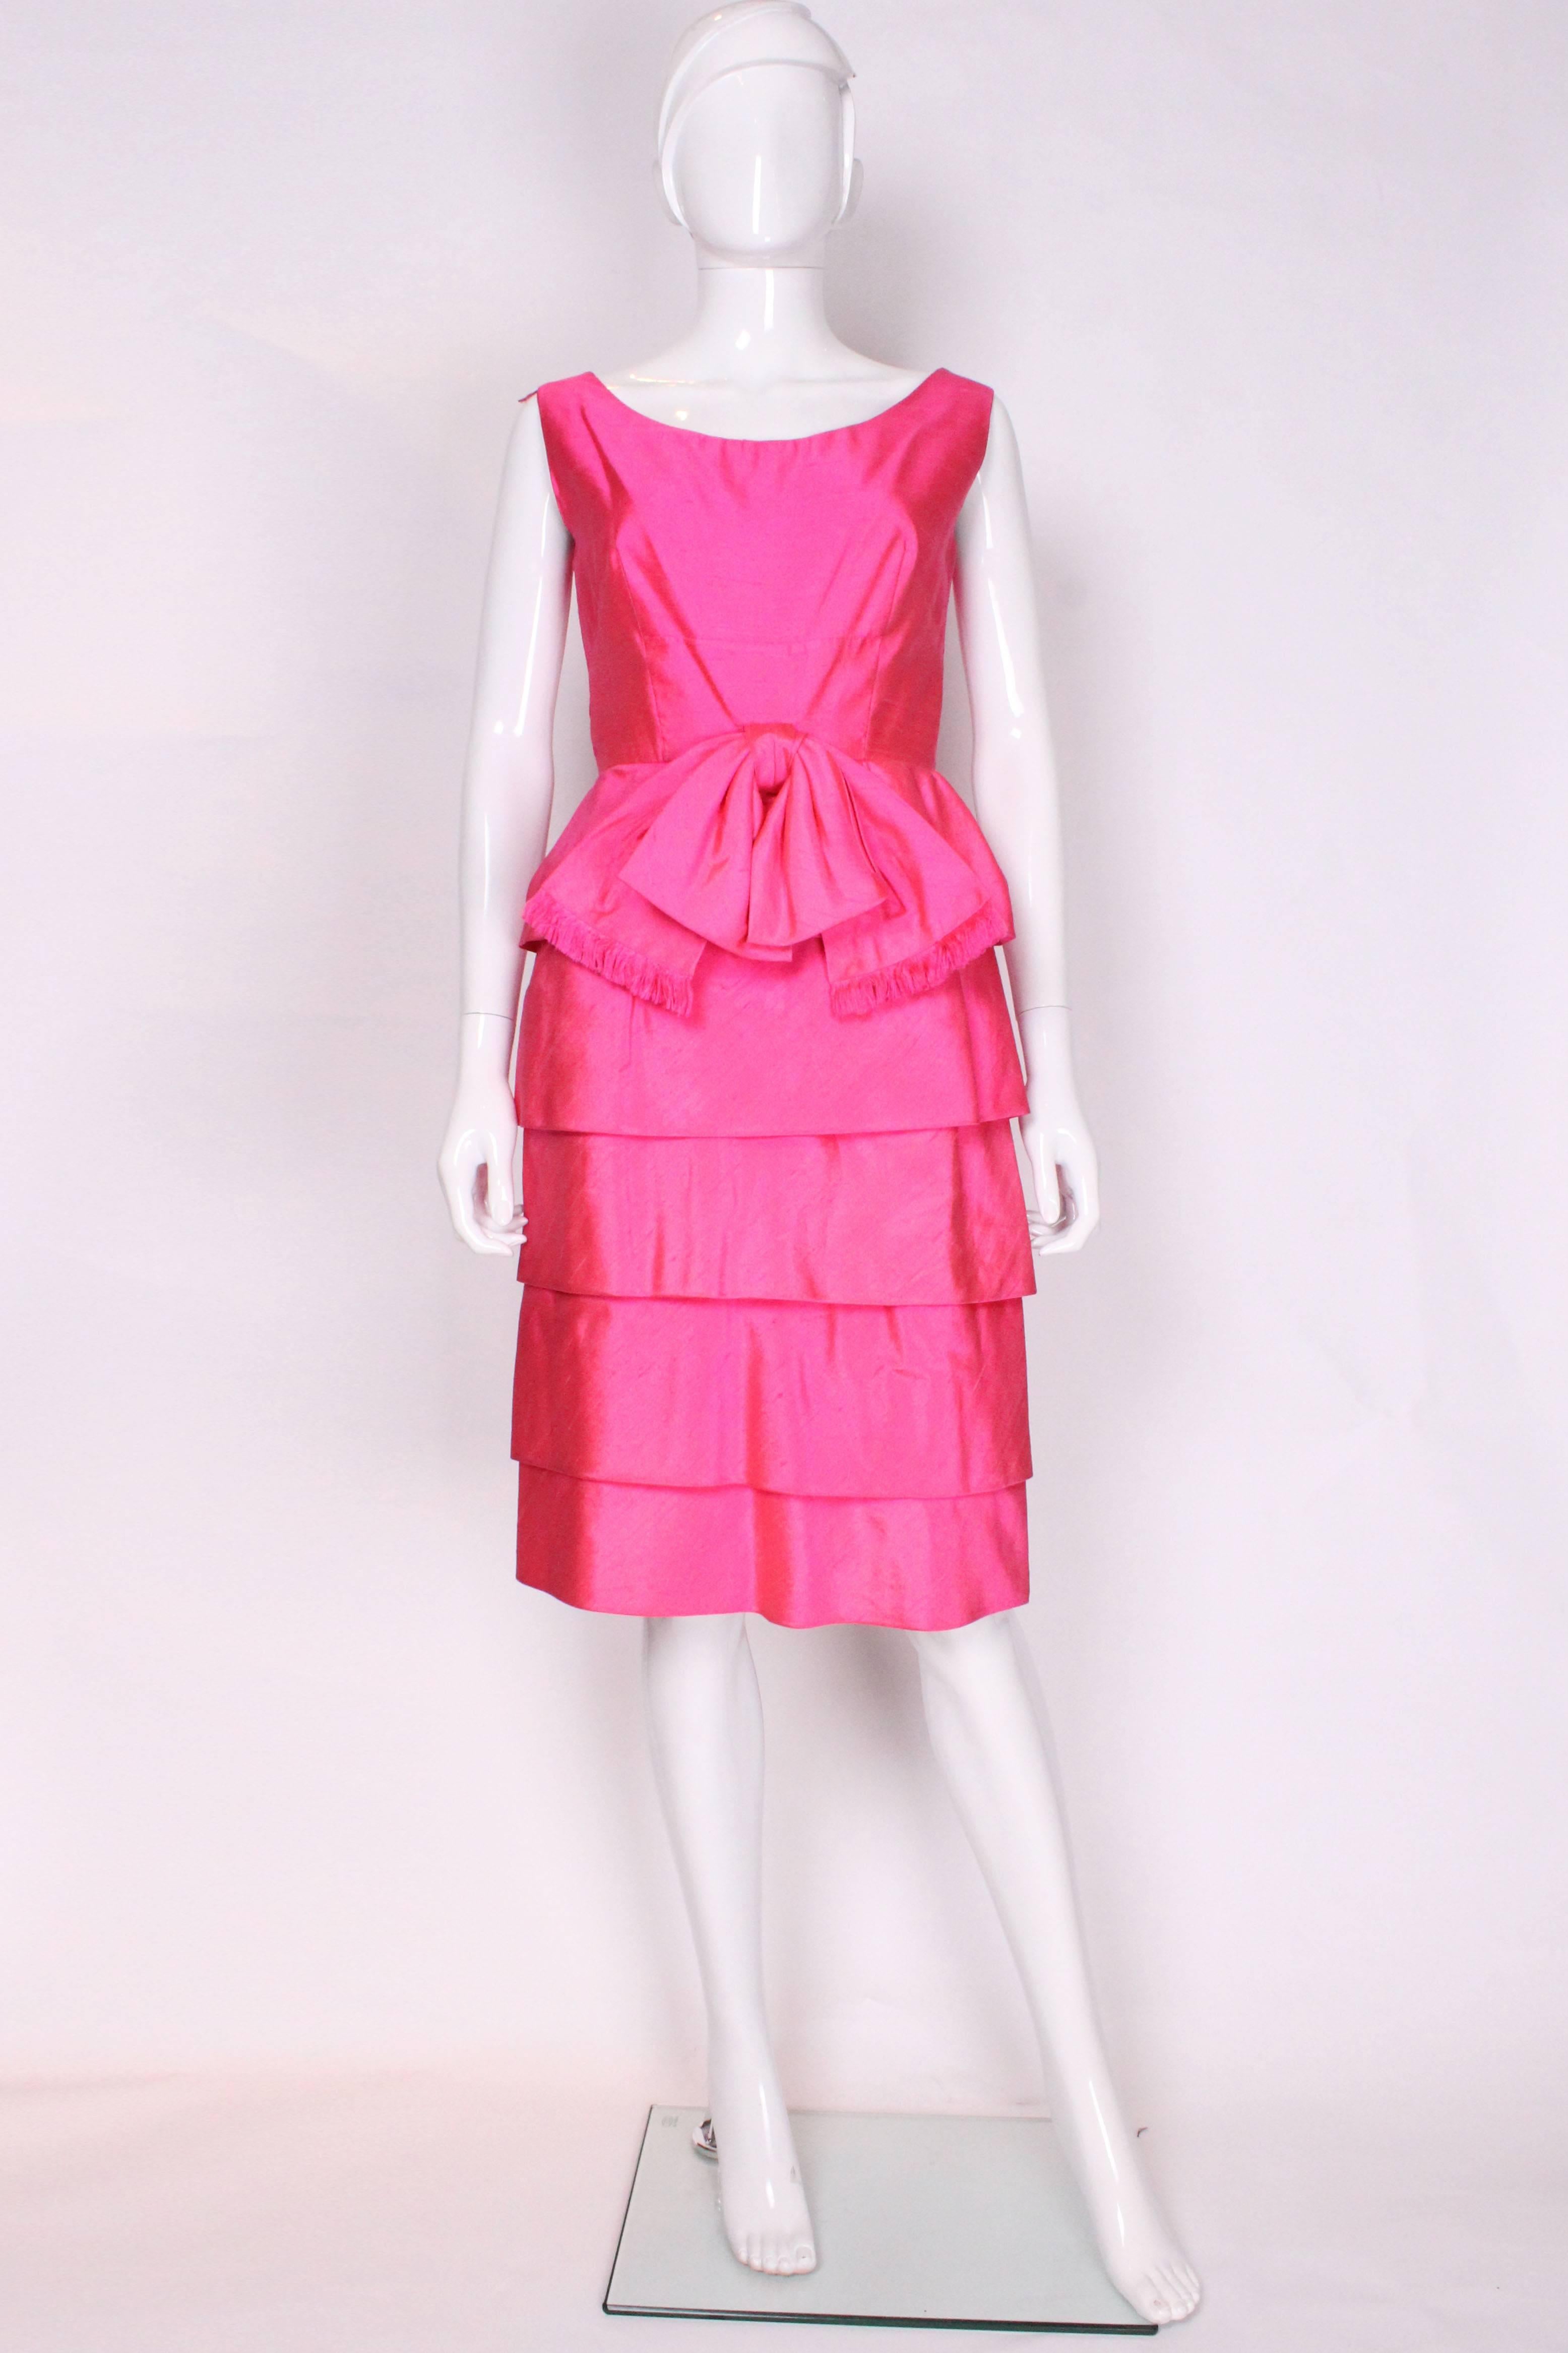 A chic cocktail dress in a wonderful pink raw silk.This dress was made for Harrods. It has a deep boat neckline, a pretty tired skirt with  5 tiers ,and large silk bow at the front.The dress is fully lined with an internal waist band and central